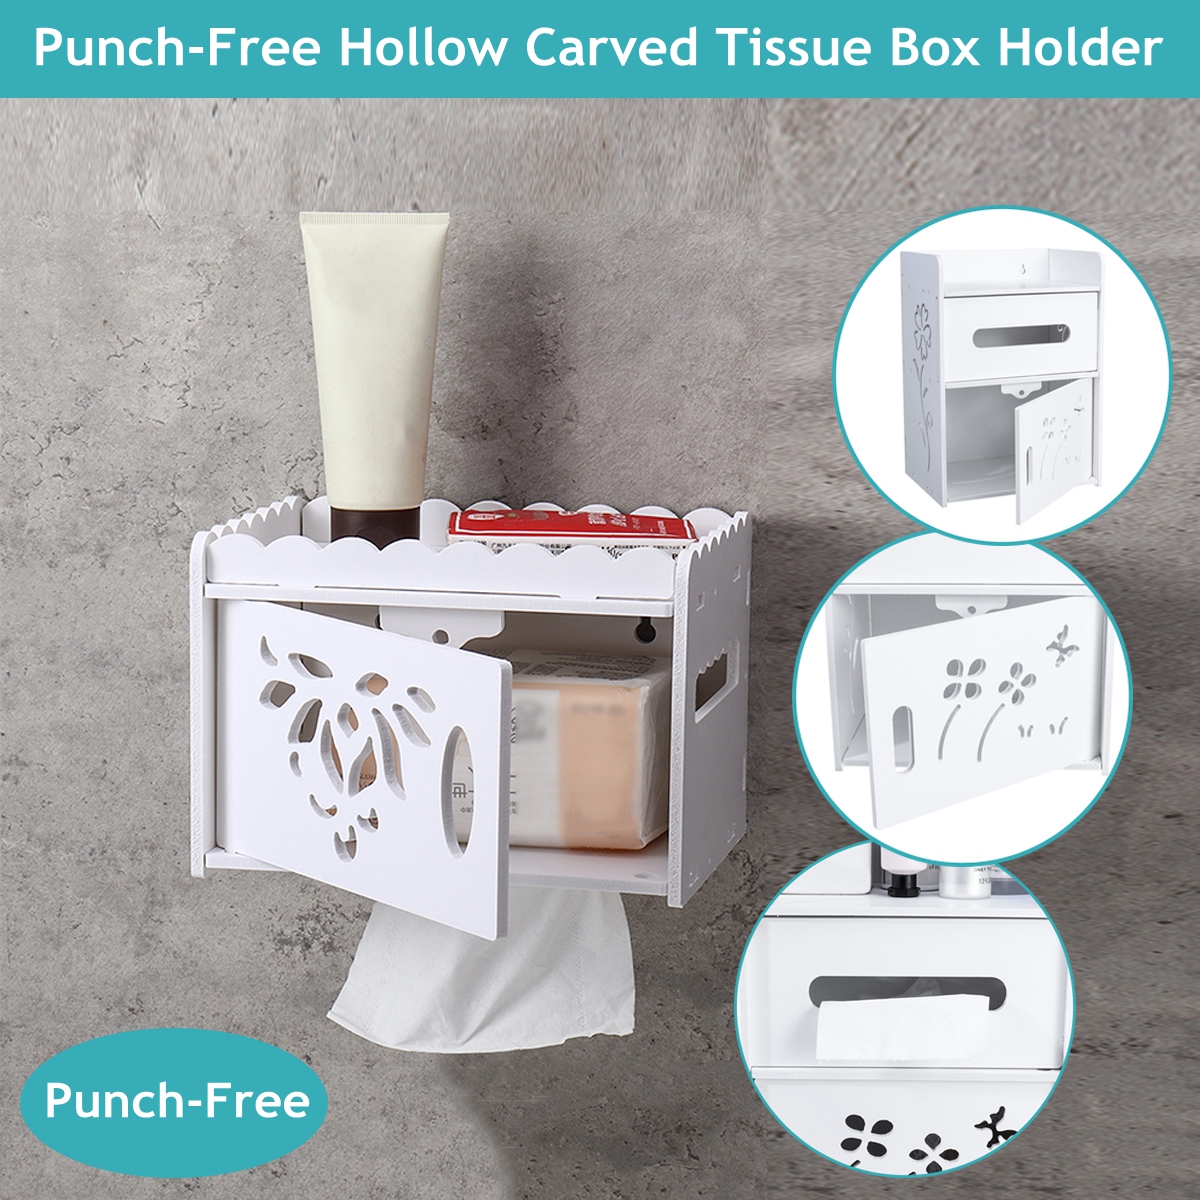 Toilet-Paper-Rack-Hand-Paper-Box-toilet-Tissue-Box-Punch-Free-Hollow-Carved-Tissue-Box-Holder-1691886-1